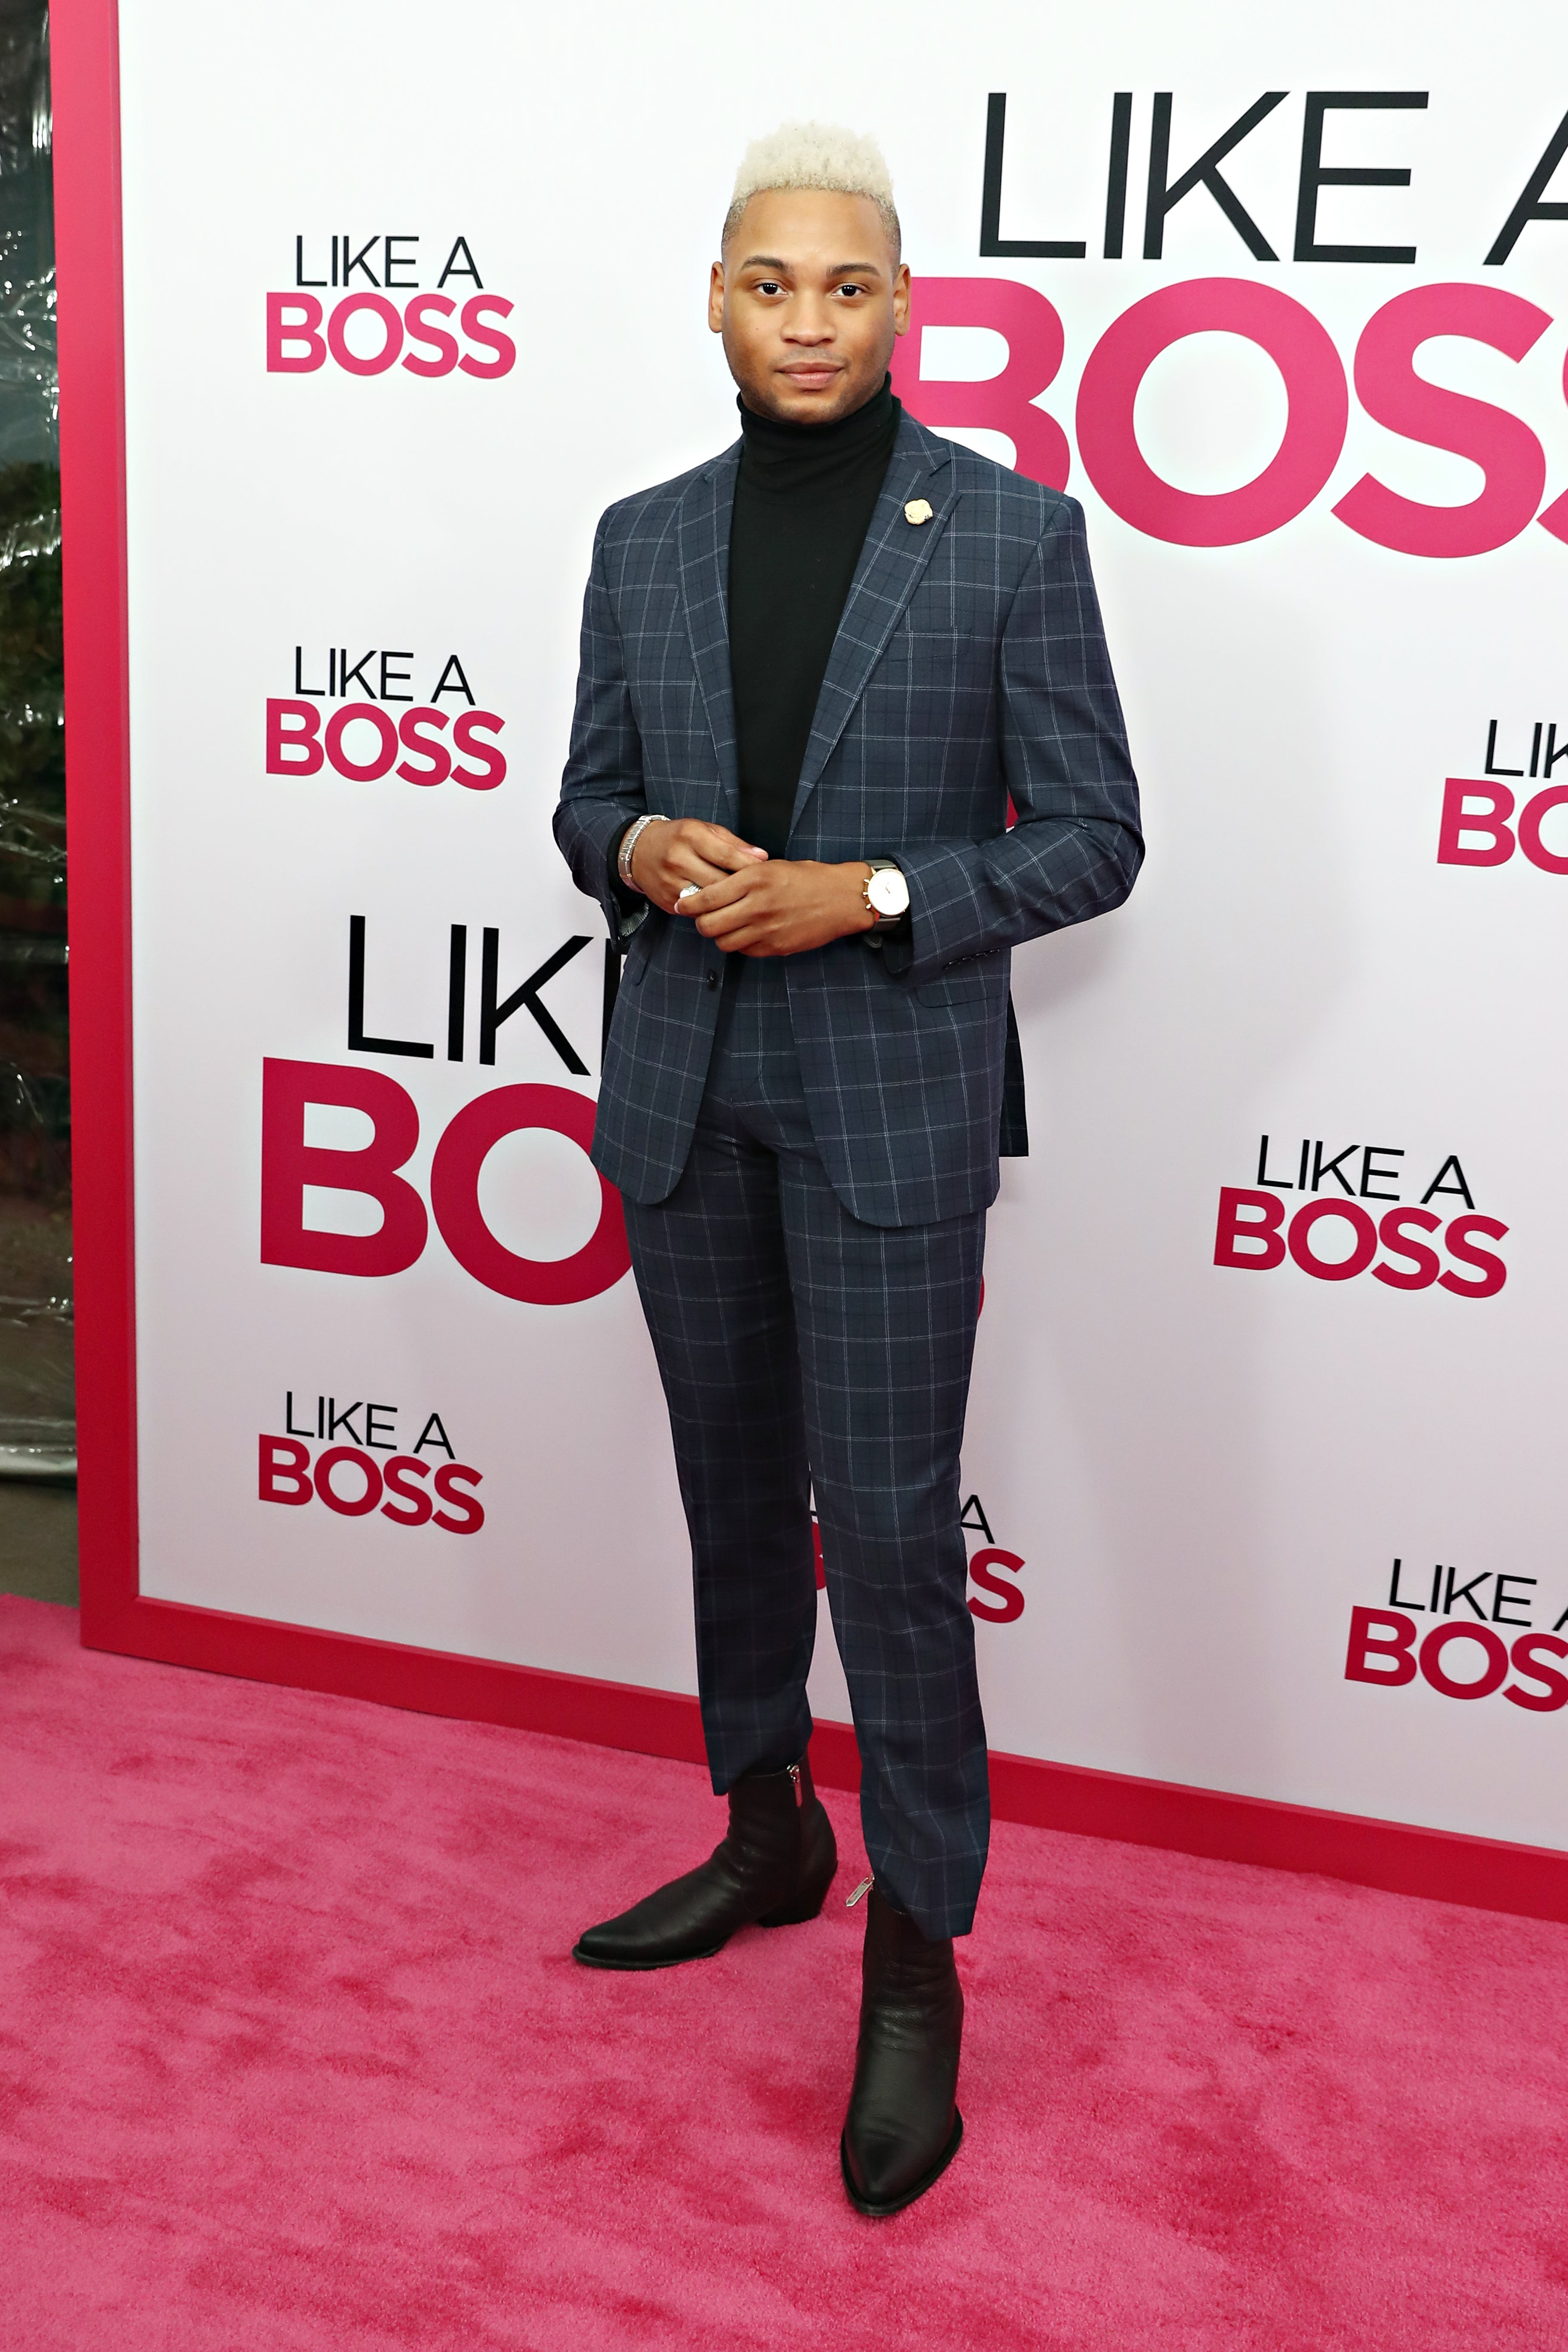 Standout Style Moments At The ‘Like A Boss’ Premiere